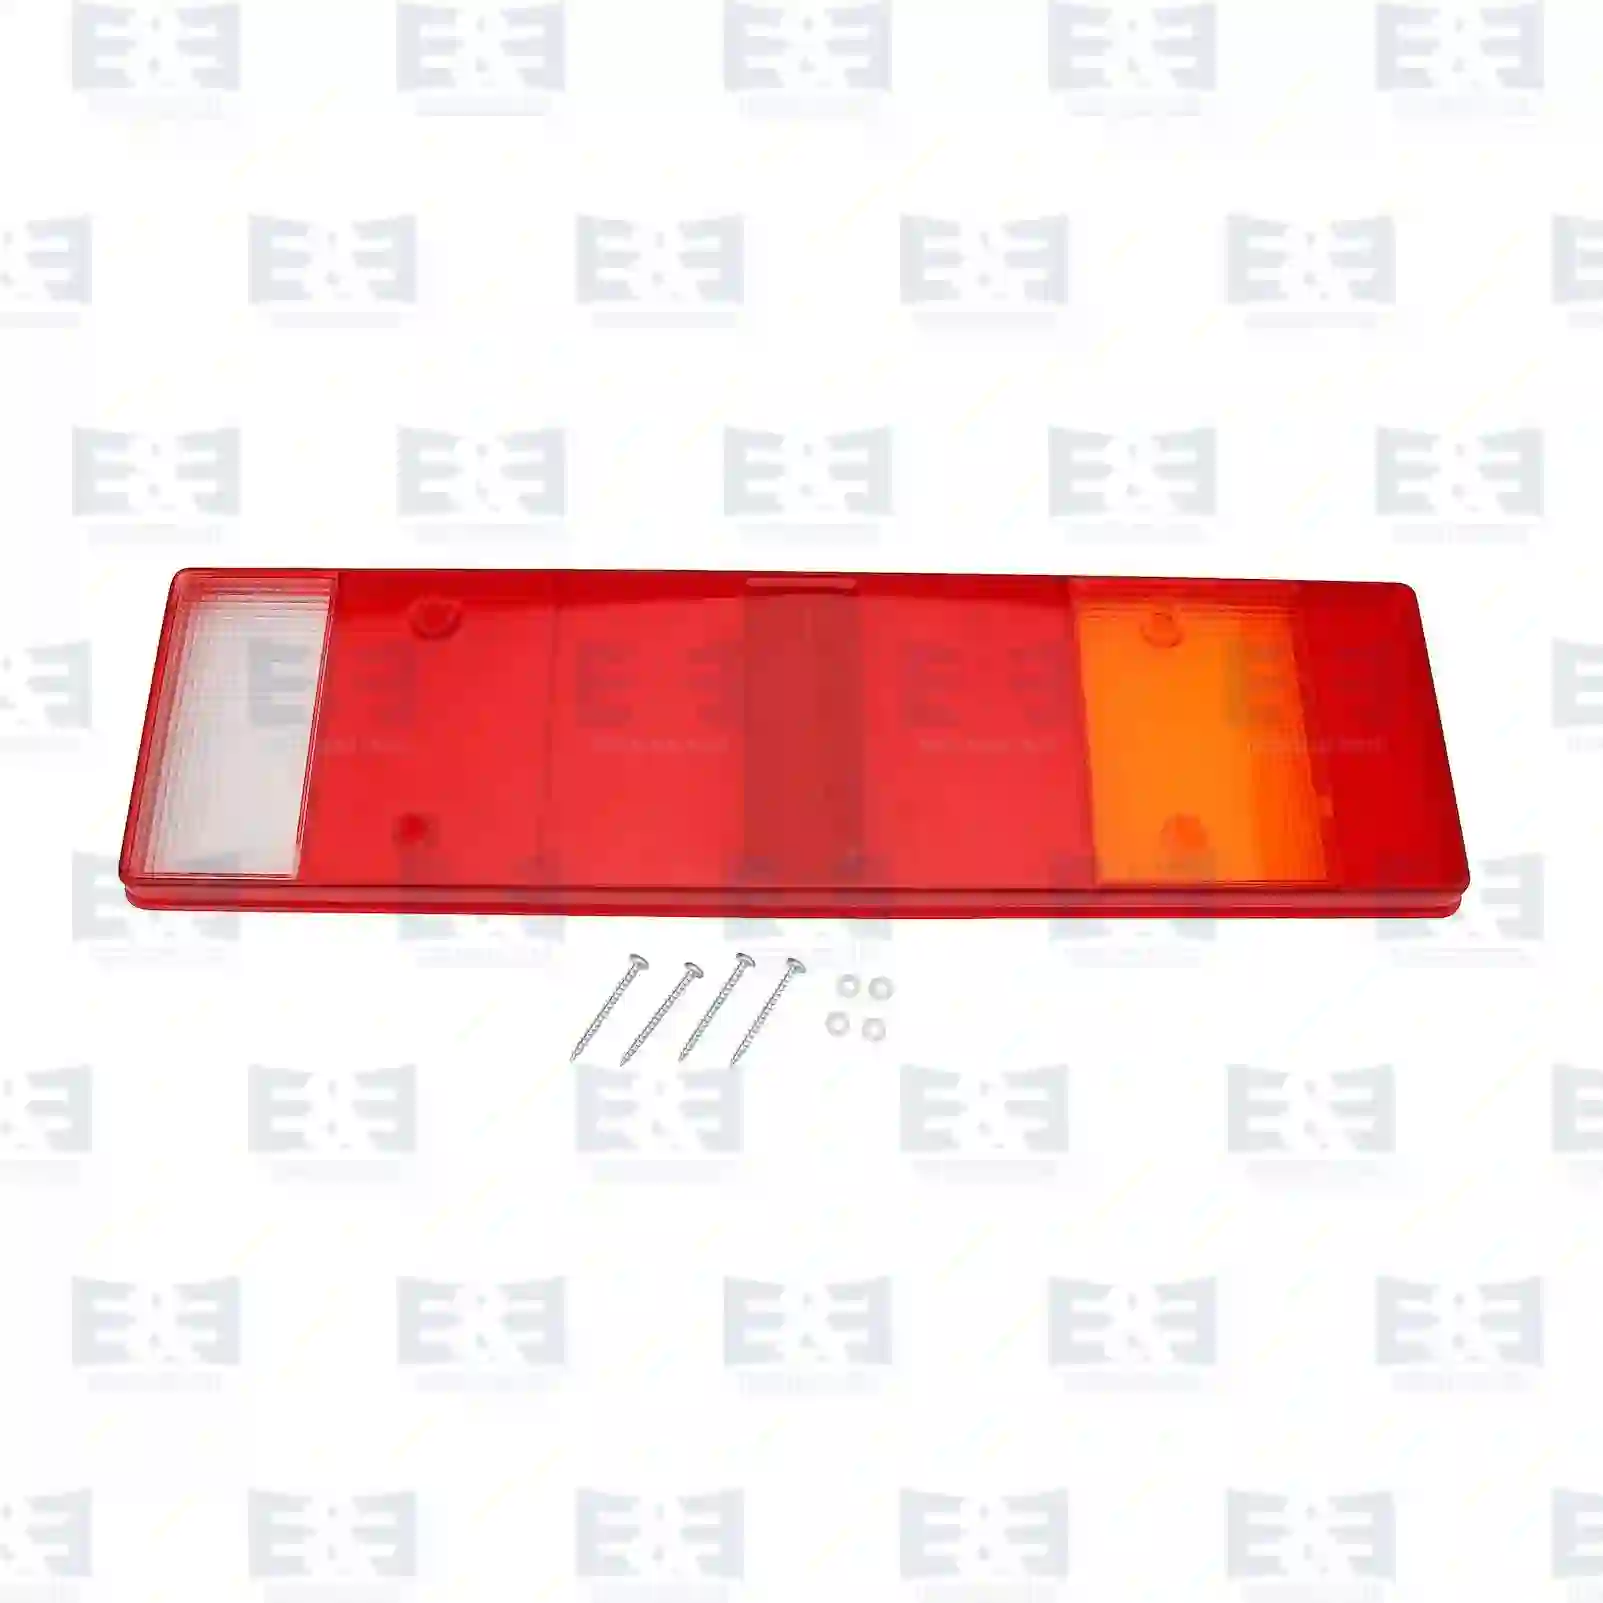 Tail Lamp Tail lamp glass, EE No 2E2290609 ,  oem no:1272653, 1440214, 1522231, 1525177, 1610194, 93161844, 93161844, 81252296051, 81252296052, 81252296055, 81252296056, 0025444490, 5000296594, 5001847588, 1350343, 1327272, 1350343, 1352746, 8920081006, 8142919, 2D0945111D, ZG21072-0008 E&E Truck Spare Parts | Truck Spare Parts, Auotomotive Spare Parts